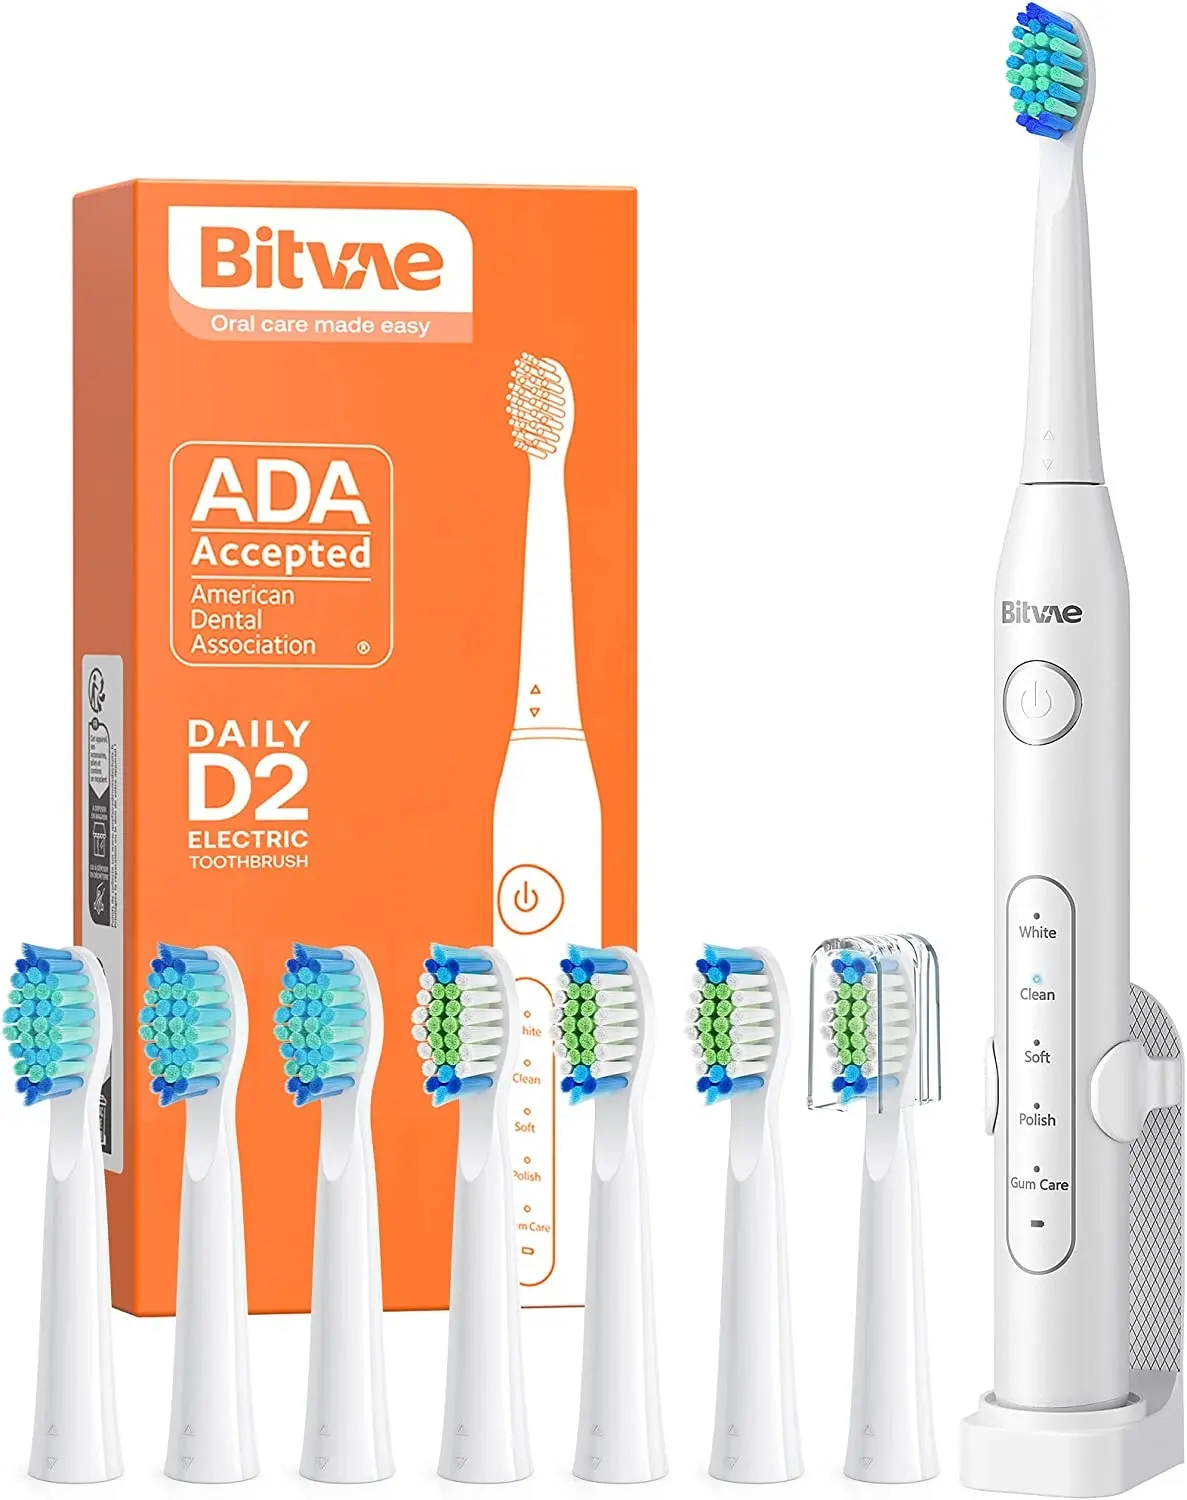 Bitvae BV D2 8 Heads Teeth Whitening Automatic Electr Ultrasonic Sonico Sonic Electron Electric Toothbrush